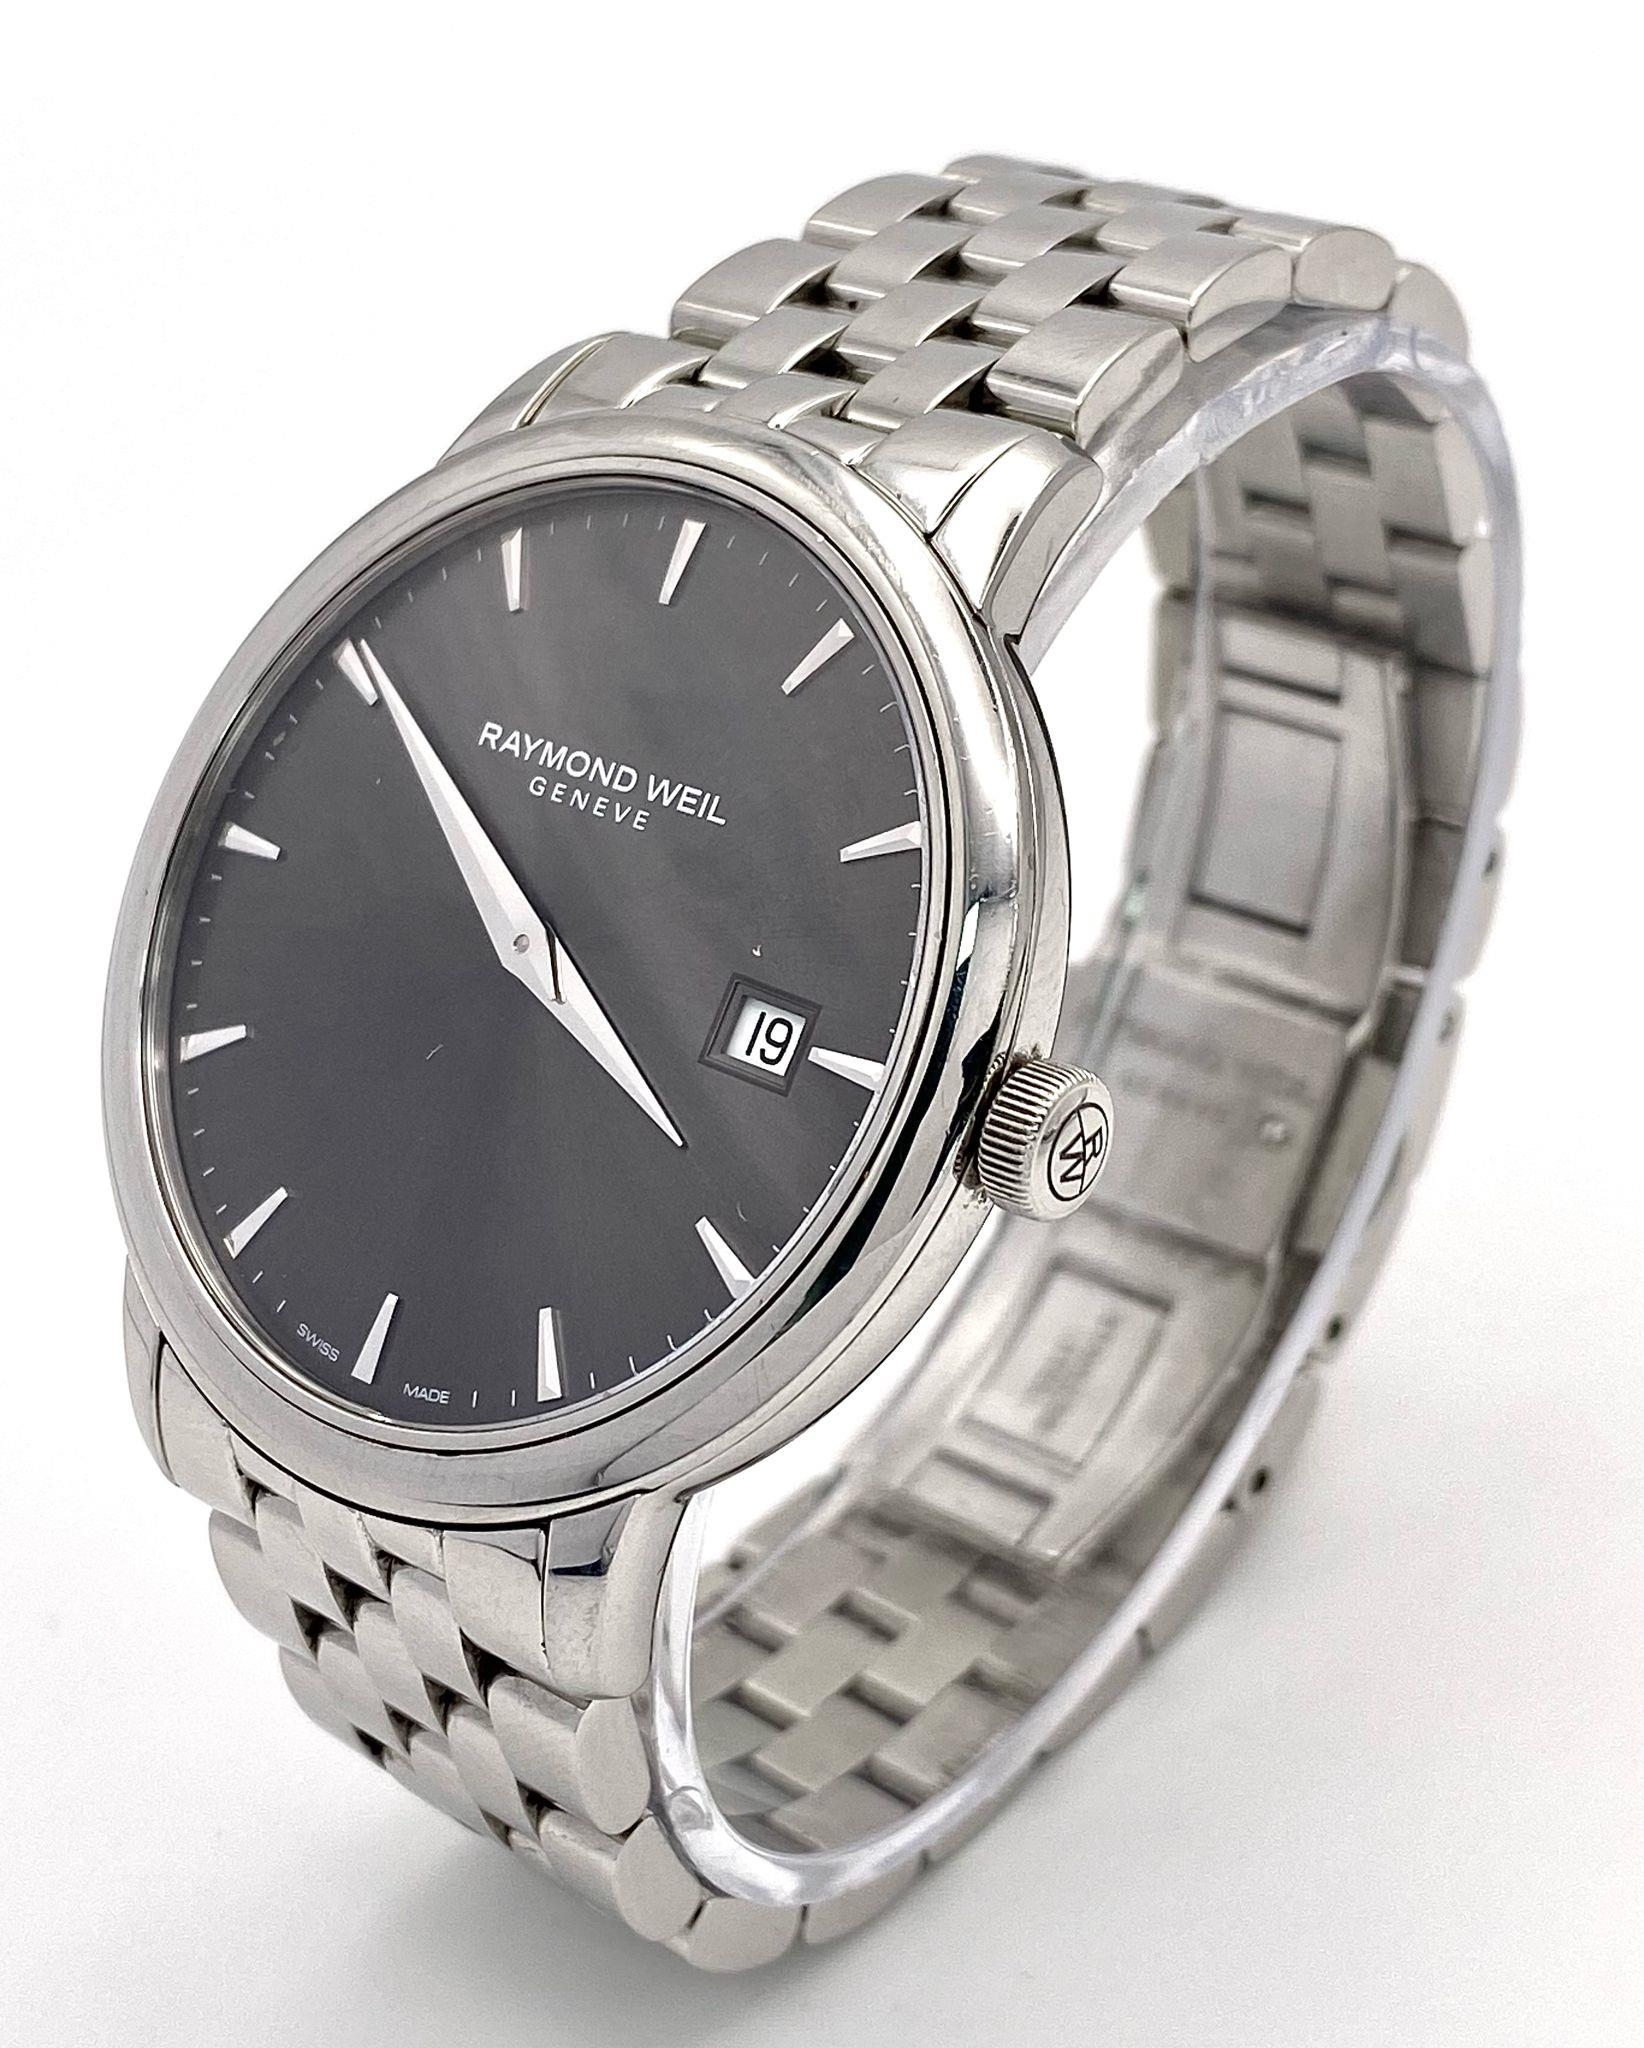 A Classic Raymond Weil Geneve Quartz Gents Watch. Stainless steel bracelet and case - 39mm. Silver - Image 2 of 10